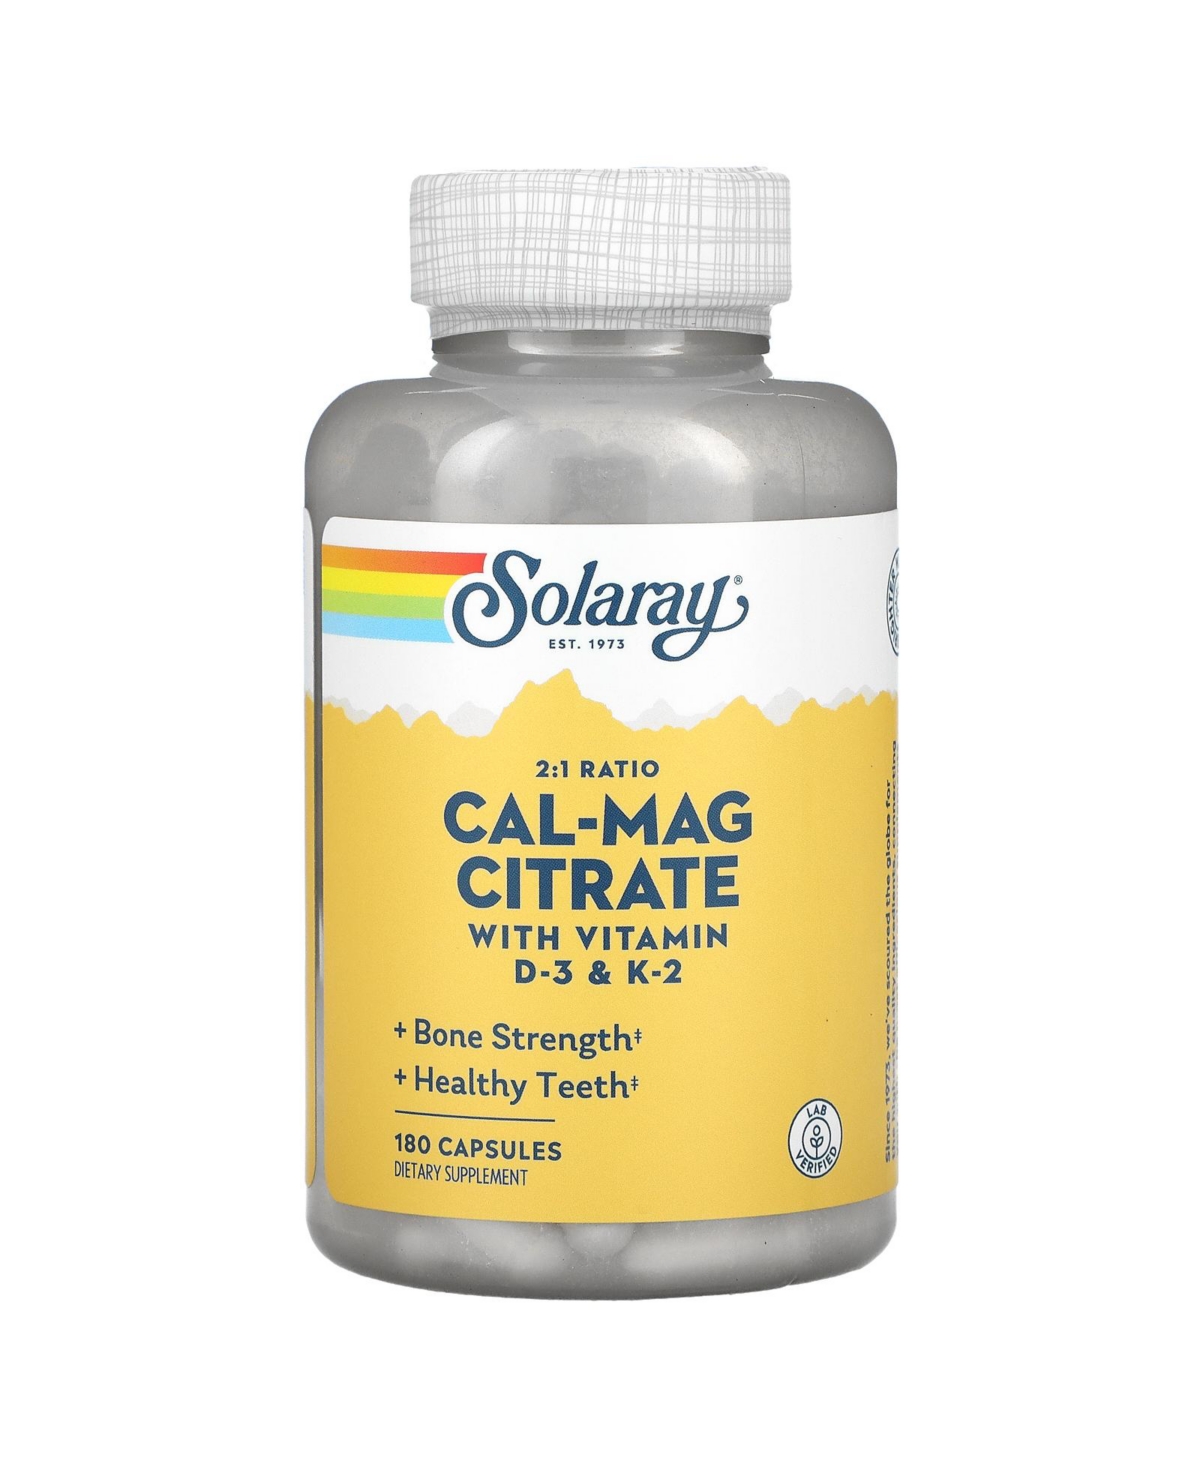 Cal-Mag Citrate 2:1 Ratio - 180 Capsules - Assorted Pre-Pack